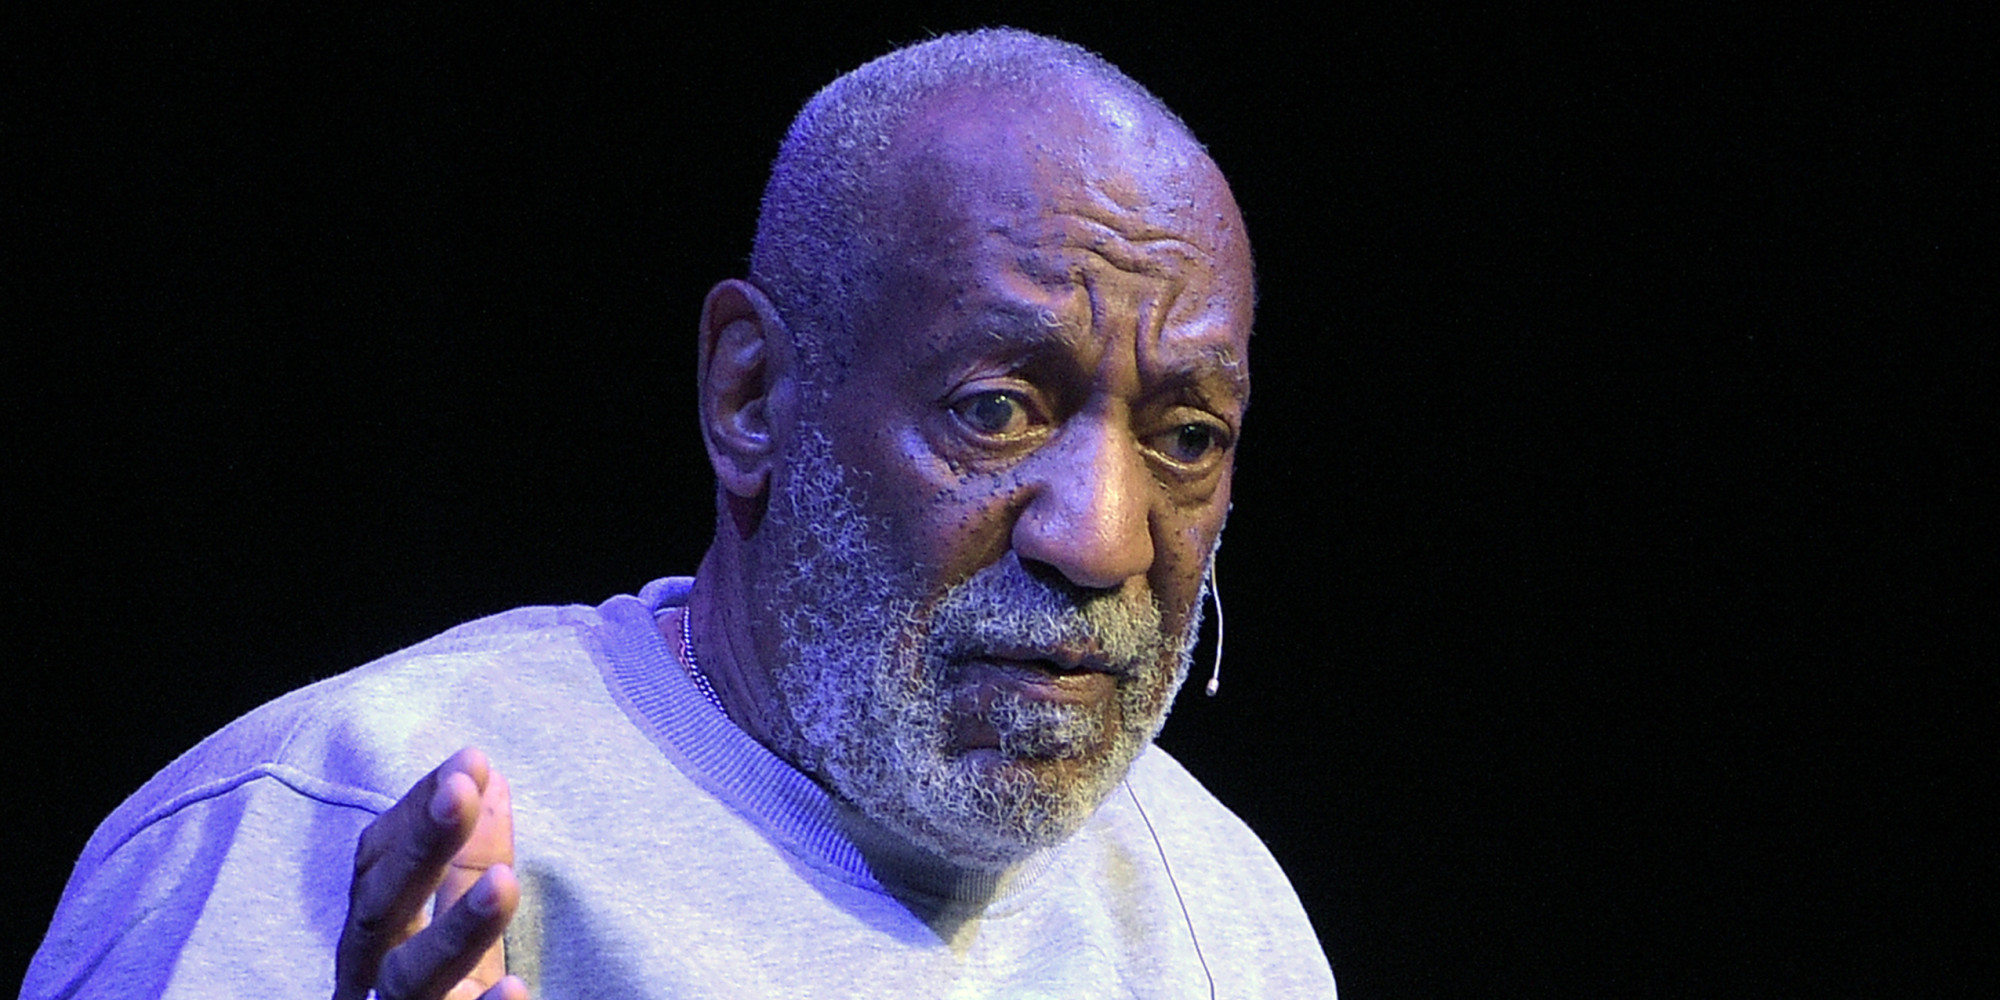 Naked Bill Cosby Statue Proposed By High School Sculptor 